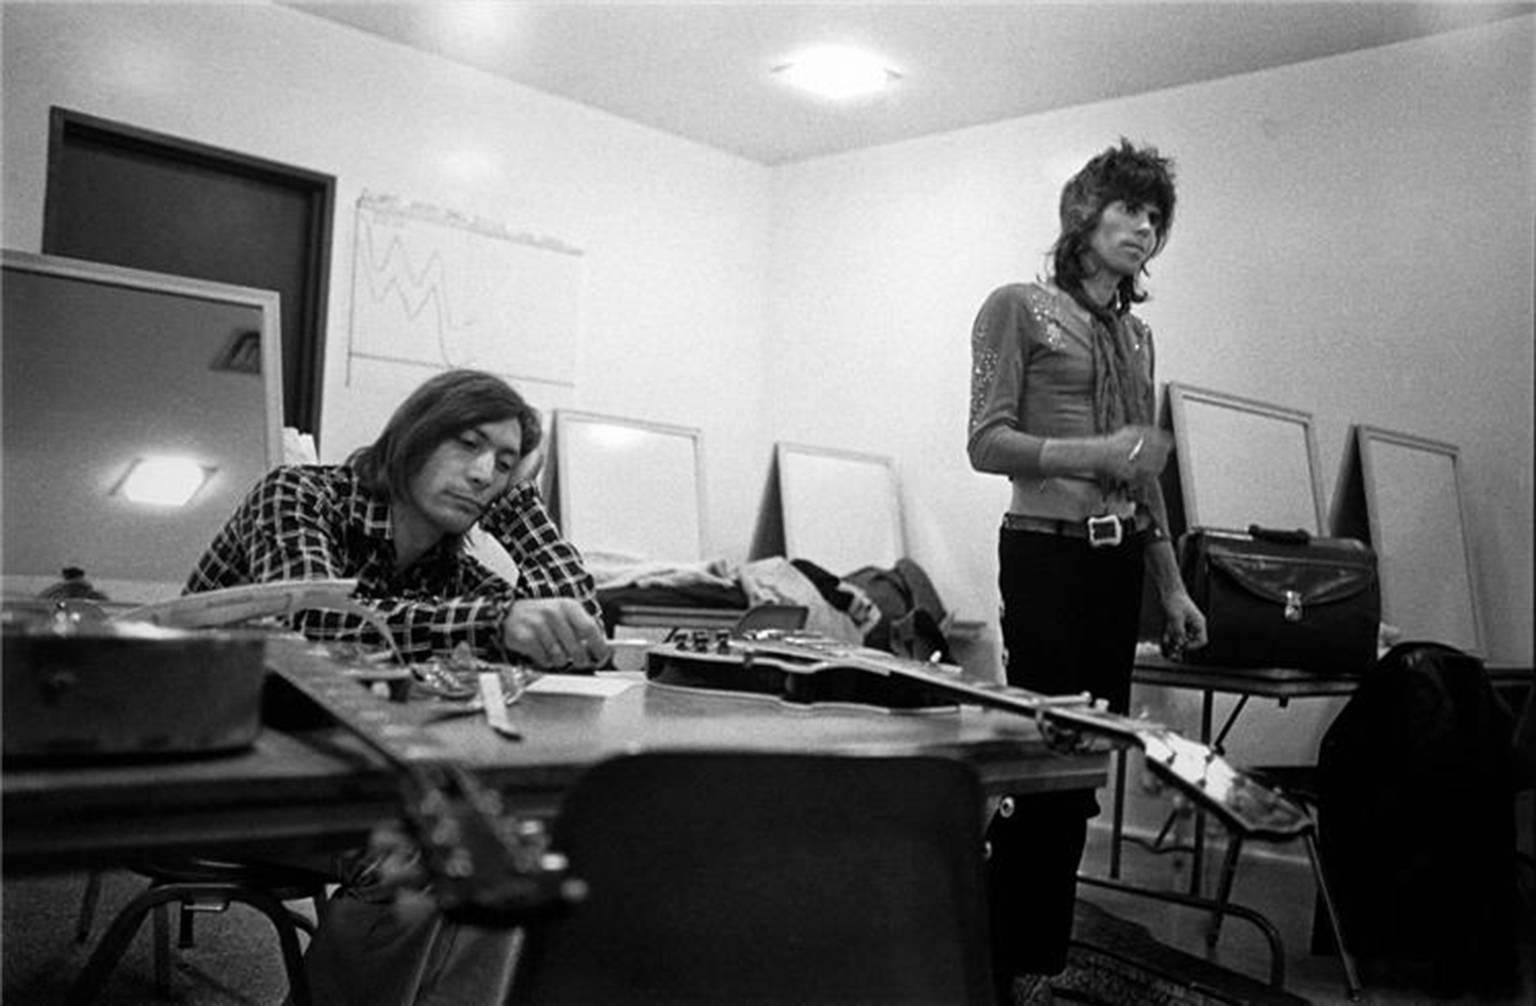 Ethan Russell Black and White Photograph - Rolling Stones Backstage